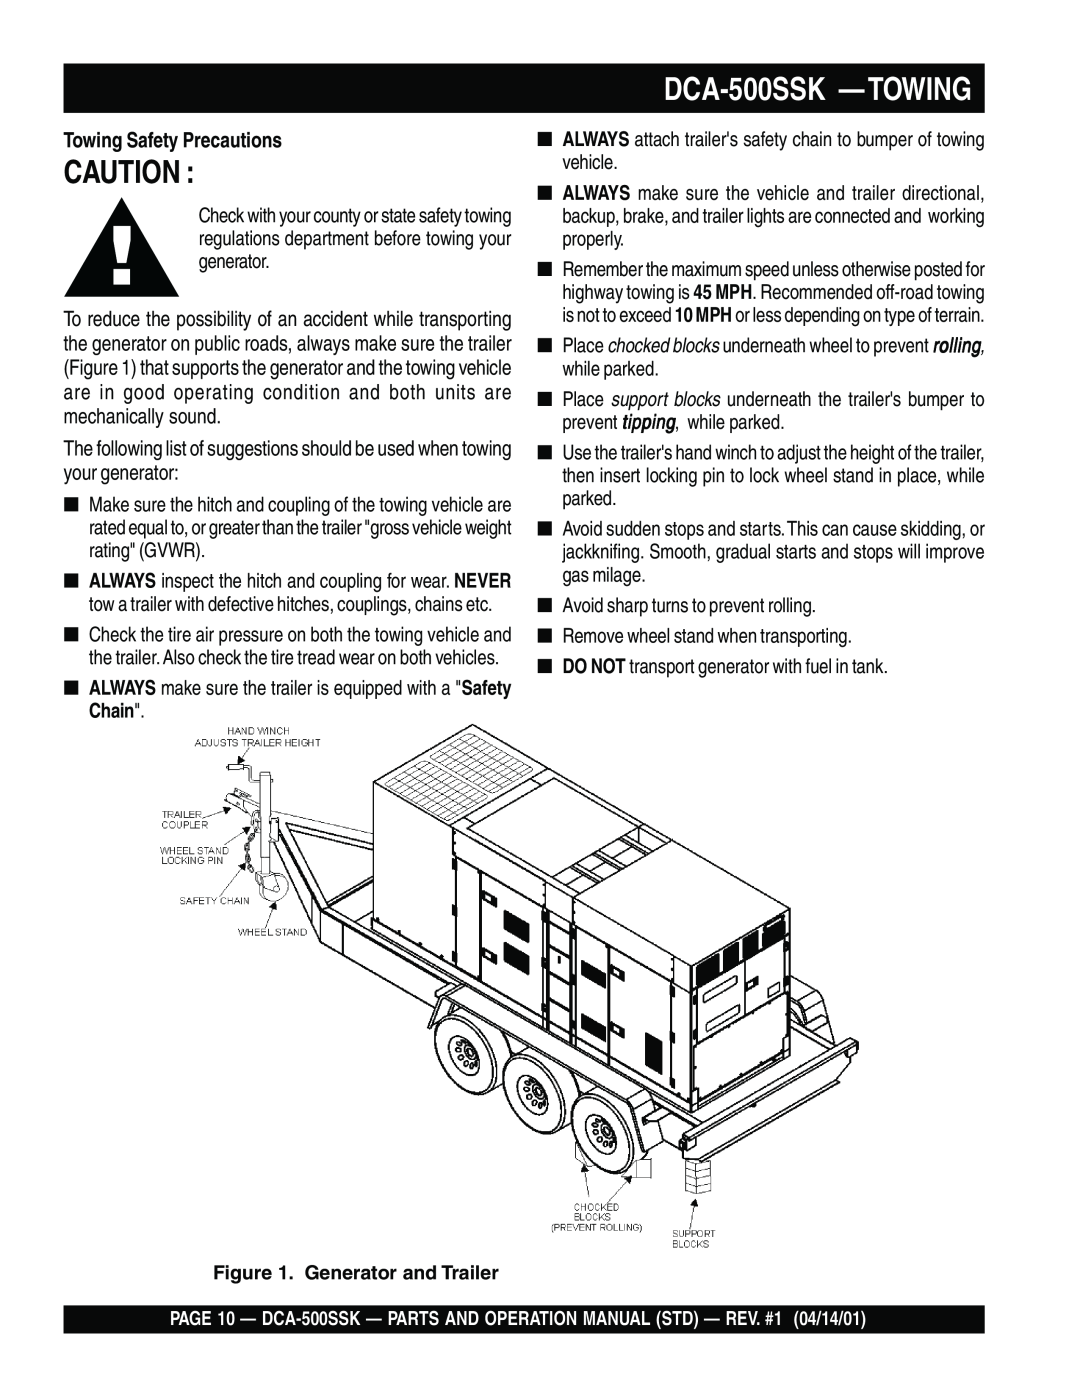 Multiquip operation manual DCA-500SSK -TOWING, Towing Safety Precautions, Generator and Trailer 